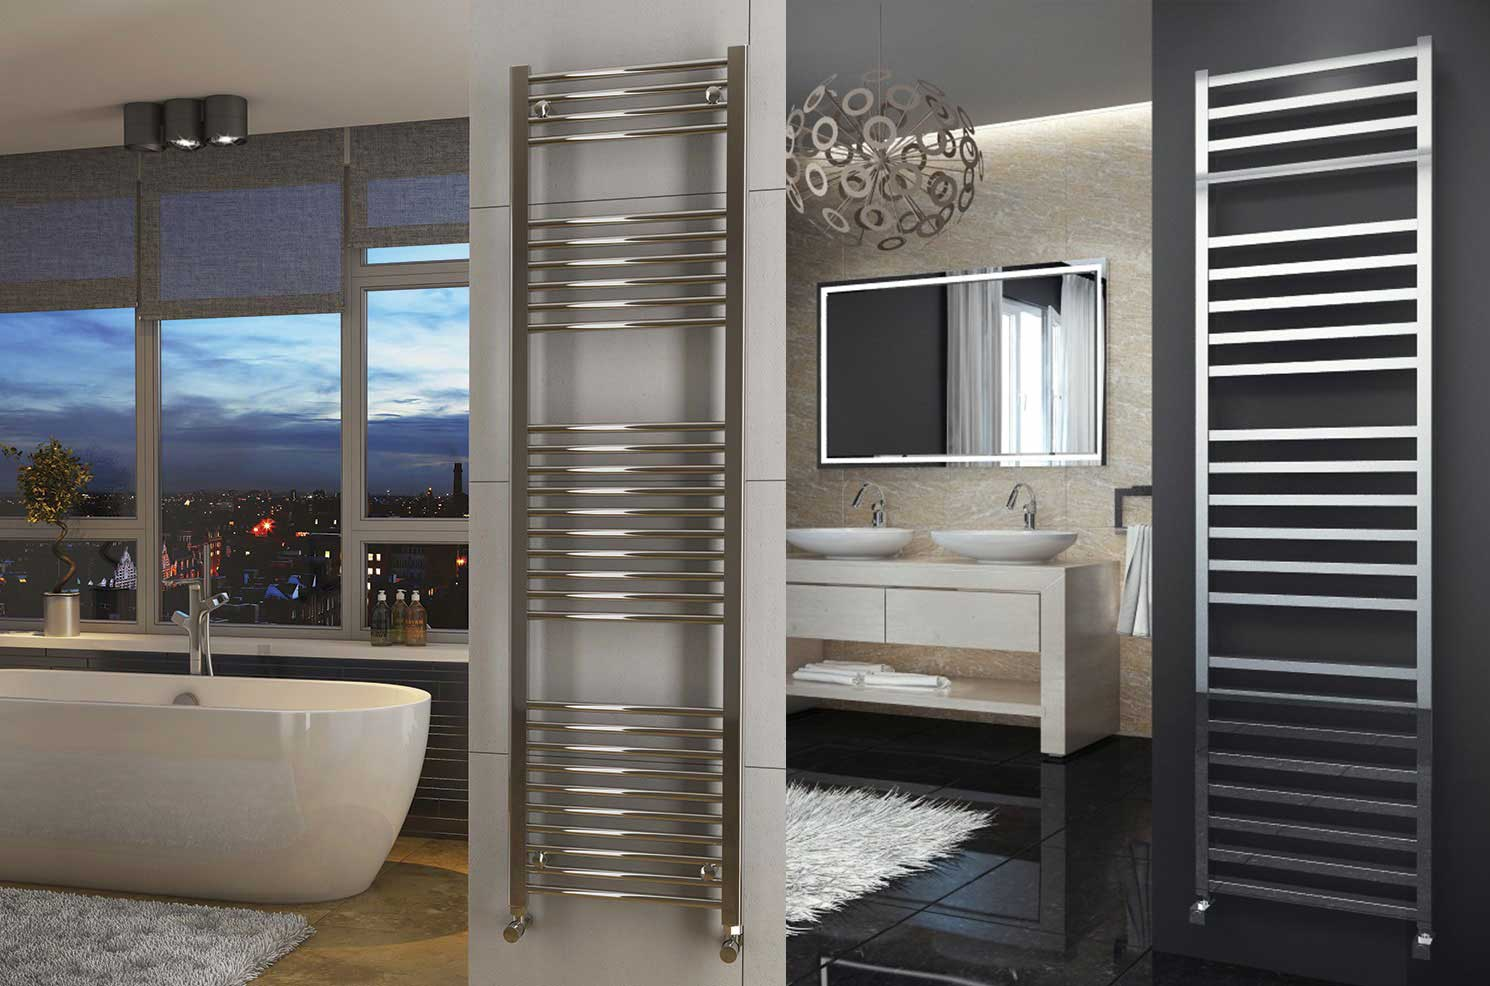 Benefits of Stainless Steel vs Chrome Towel Rails